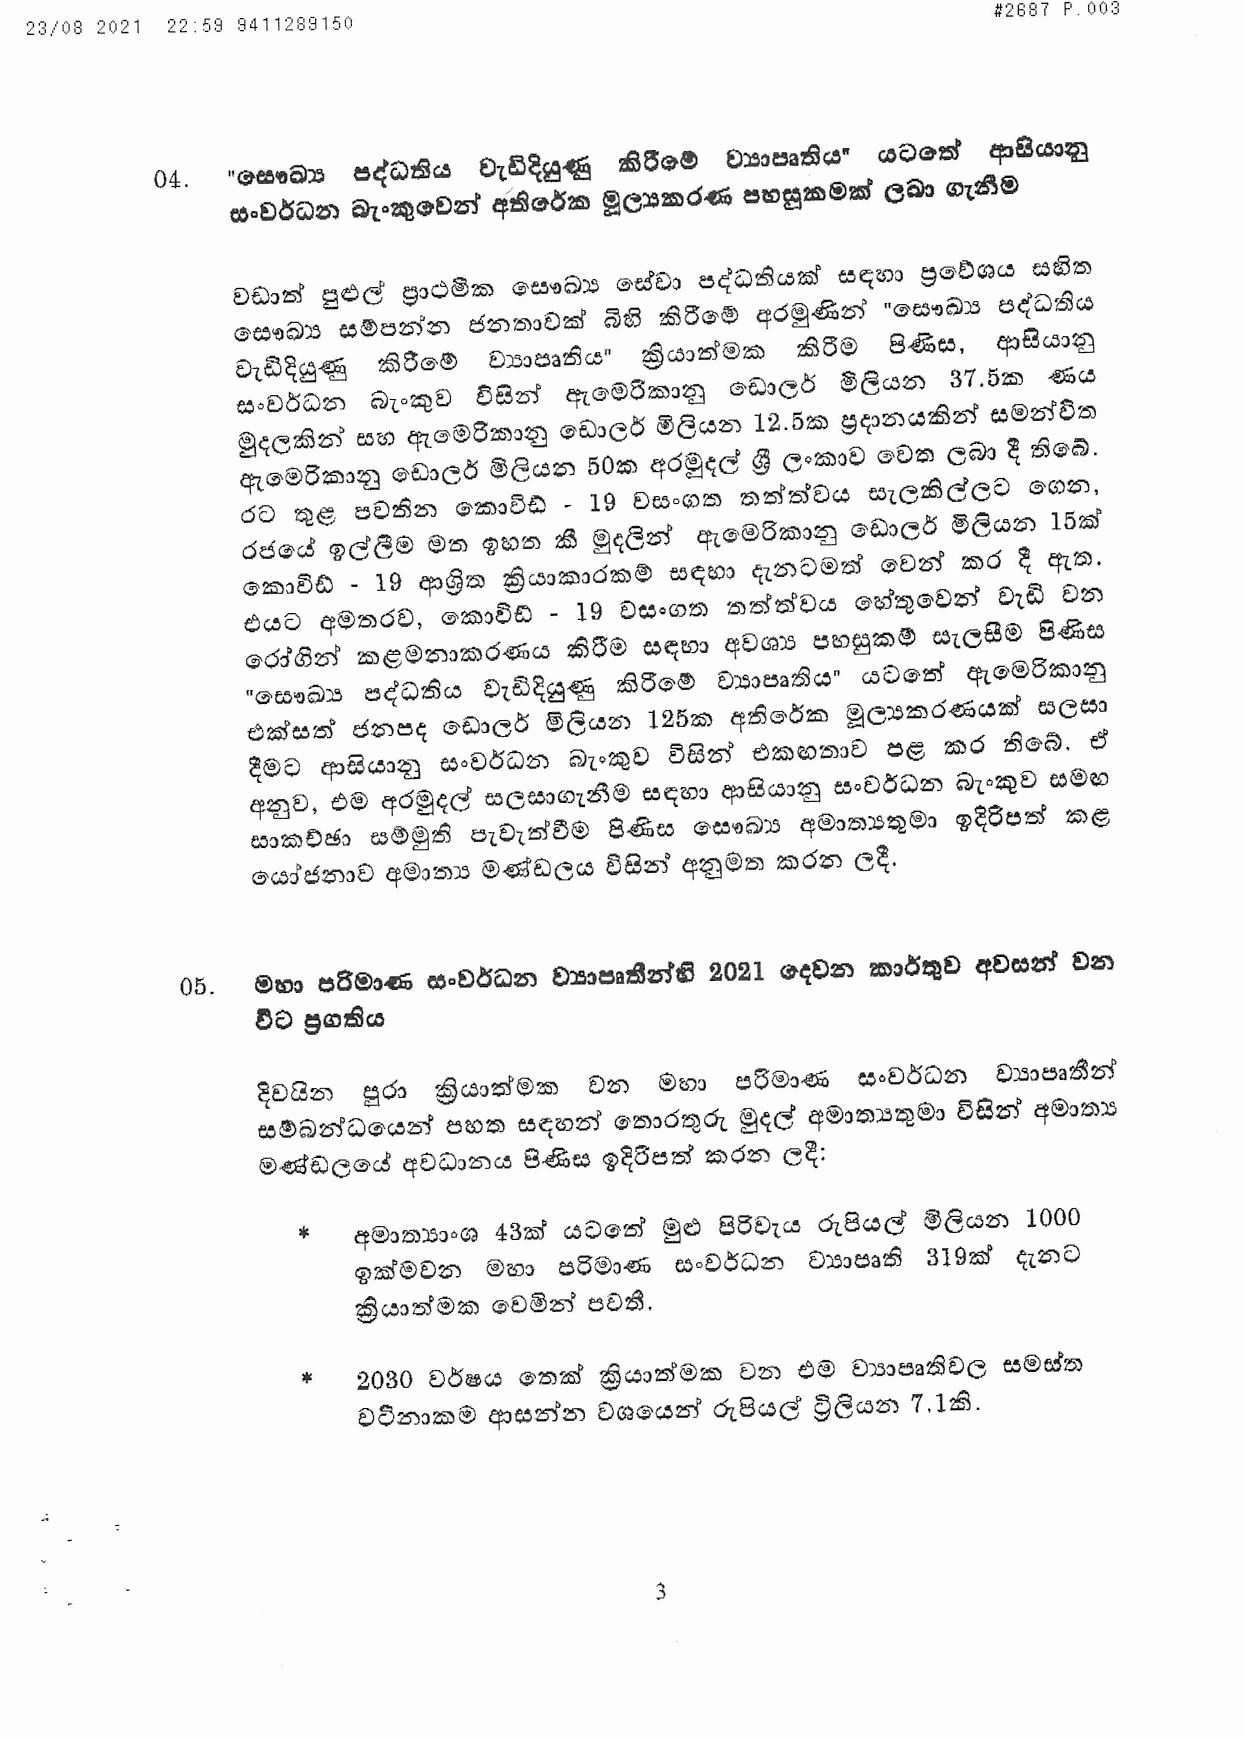 Cabinet Decision on 23.08.2021 page 001